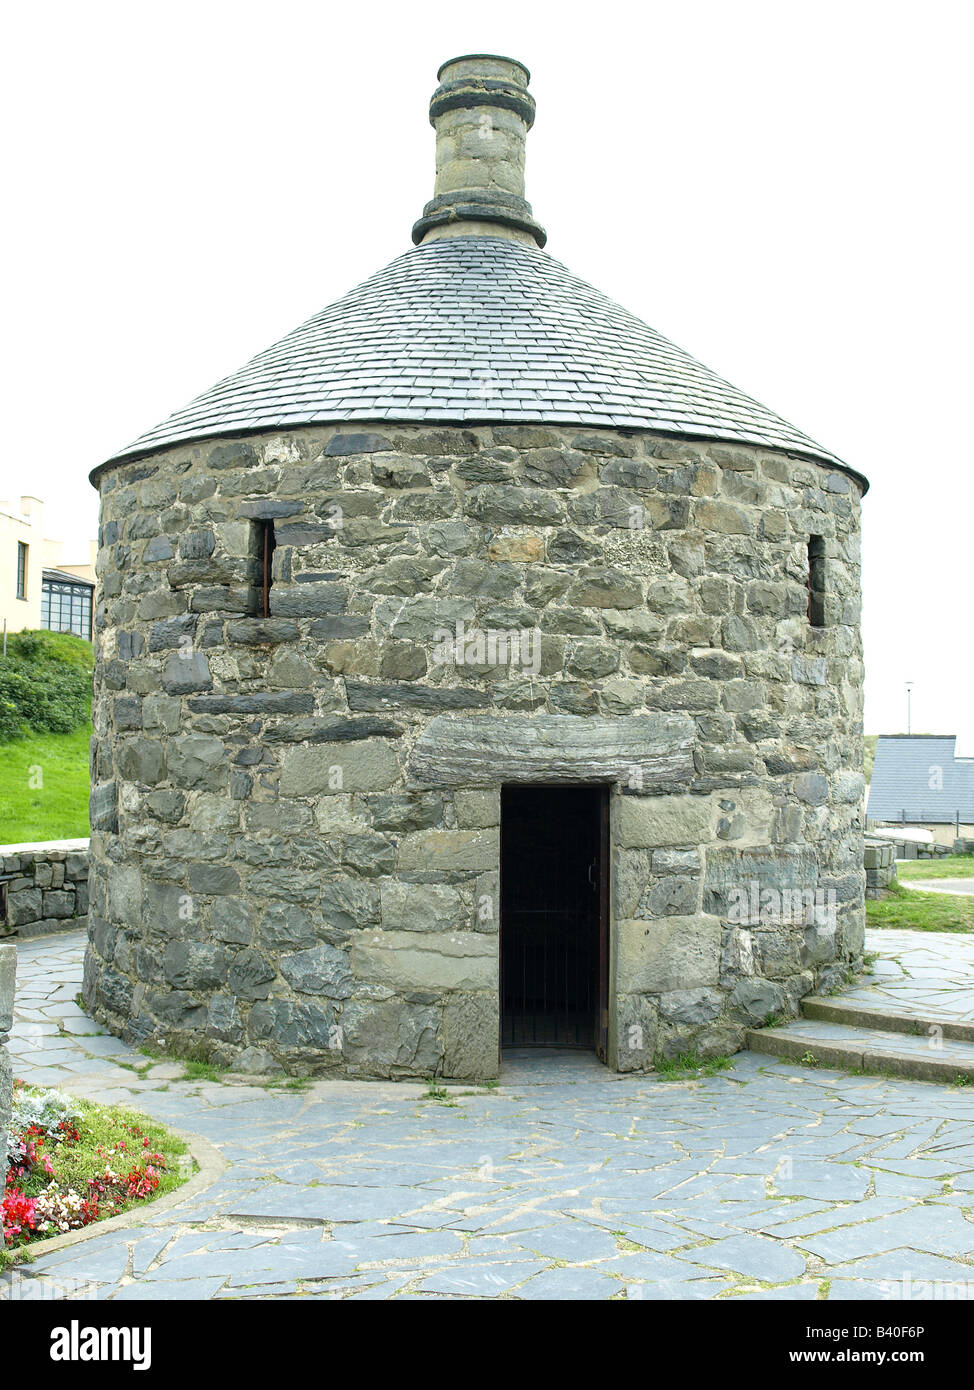 The round tower,a jail used for drunkards and thieves and built in 1834 at Barmouth,Wales,uk. Stock Photo